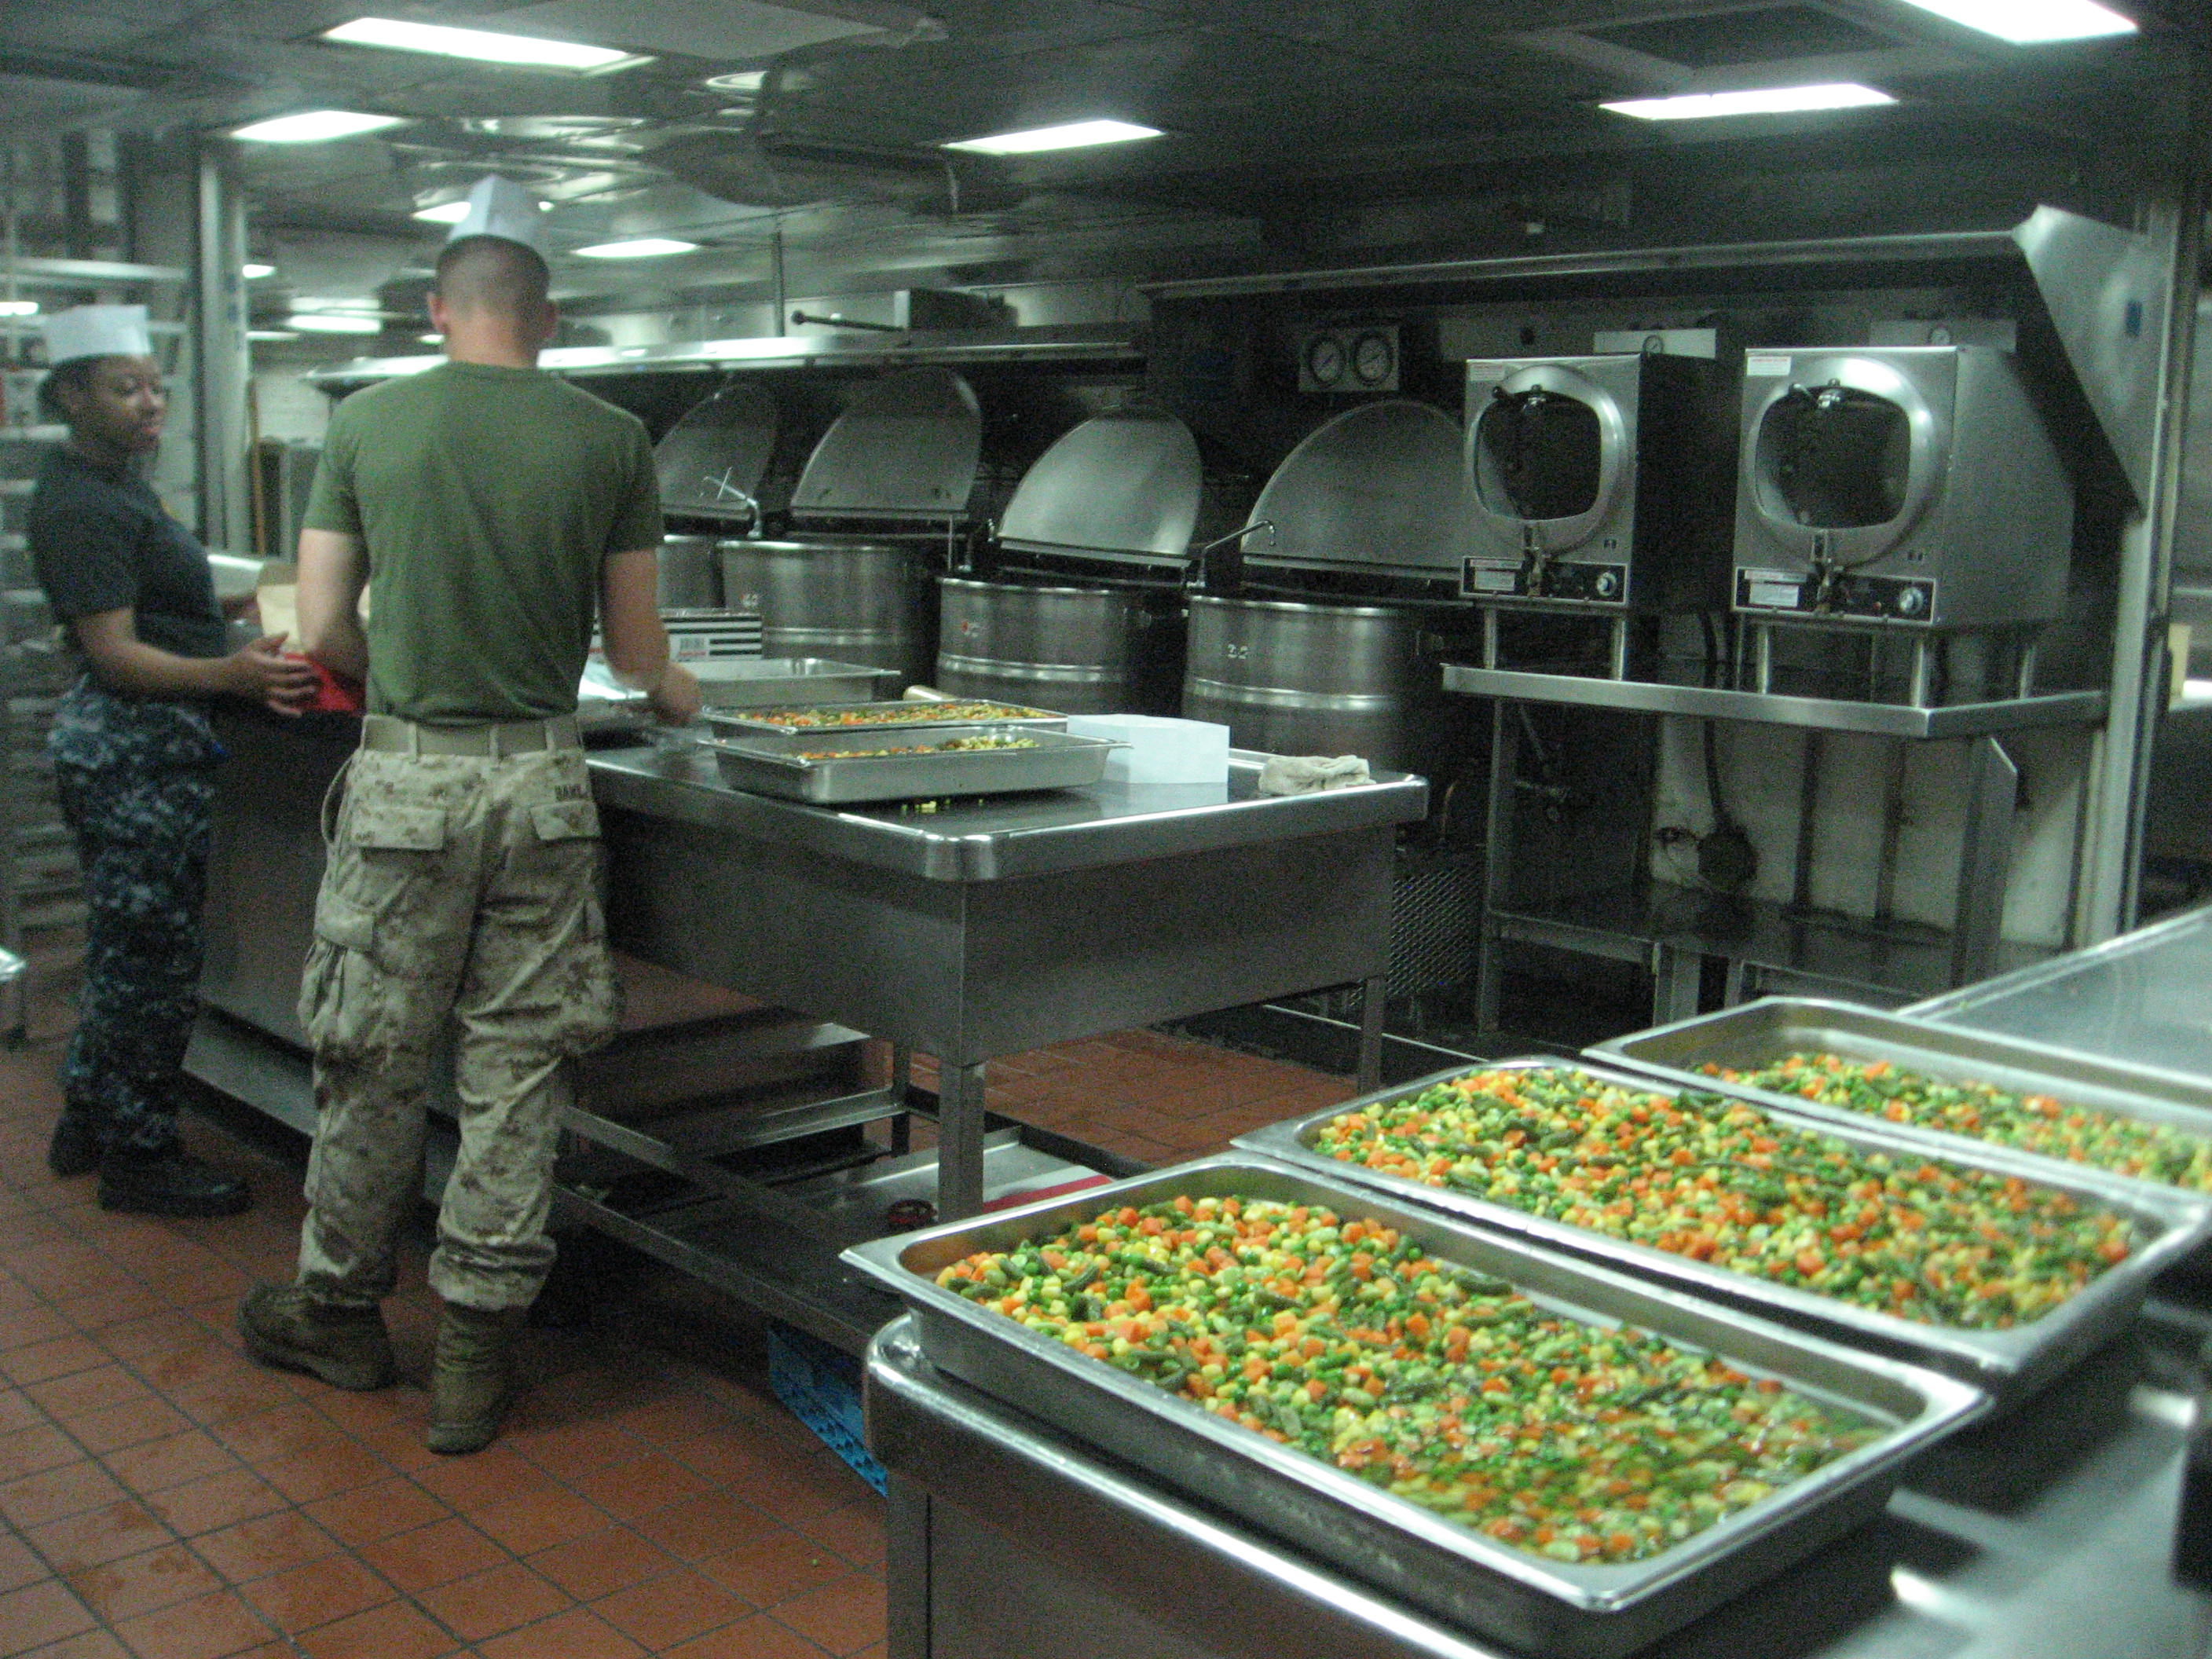 getting-ready-for-lunch-in-the-enlisted-mess-on-the-uss-wasp.jpg 